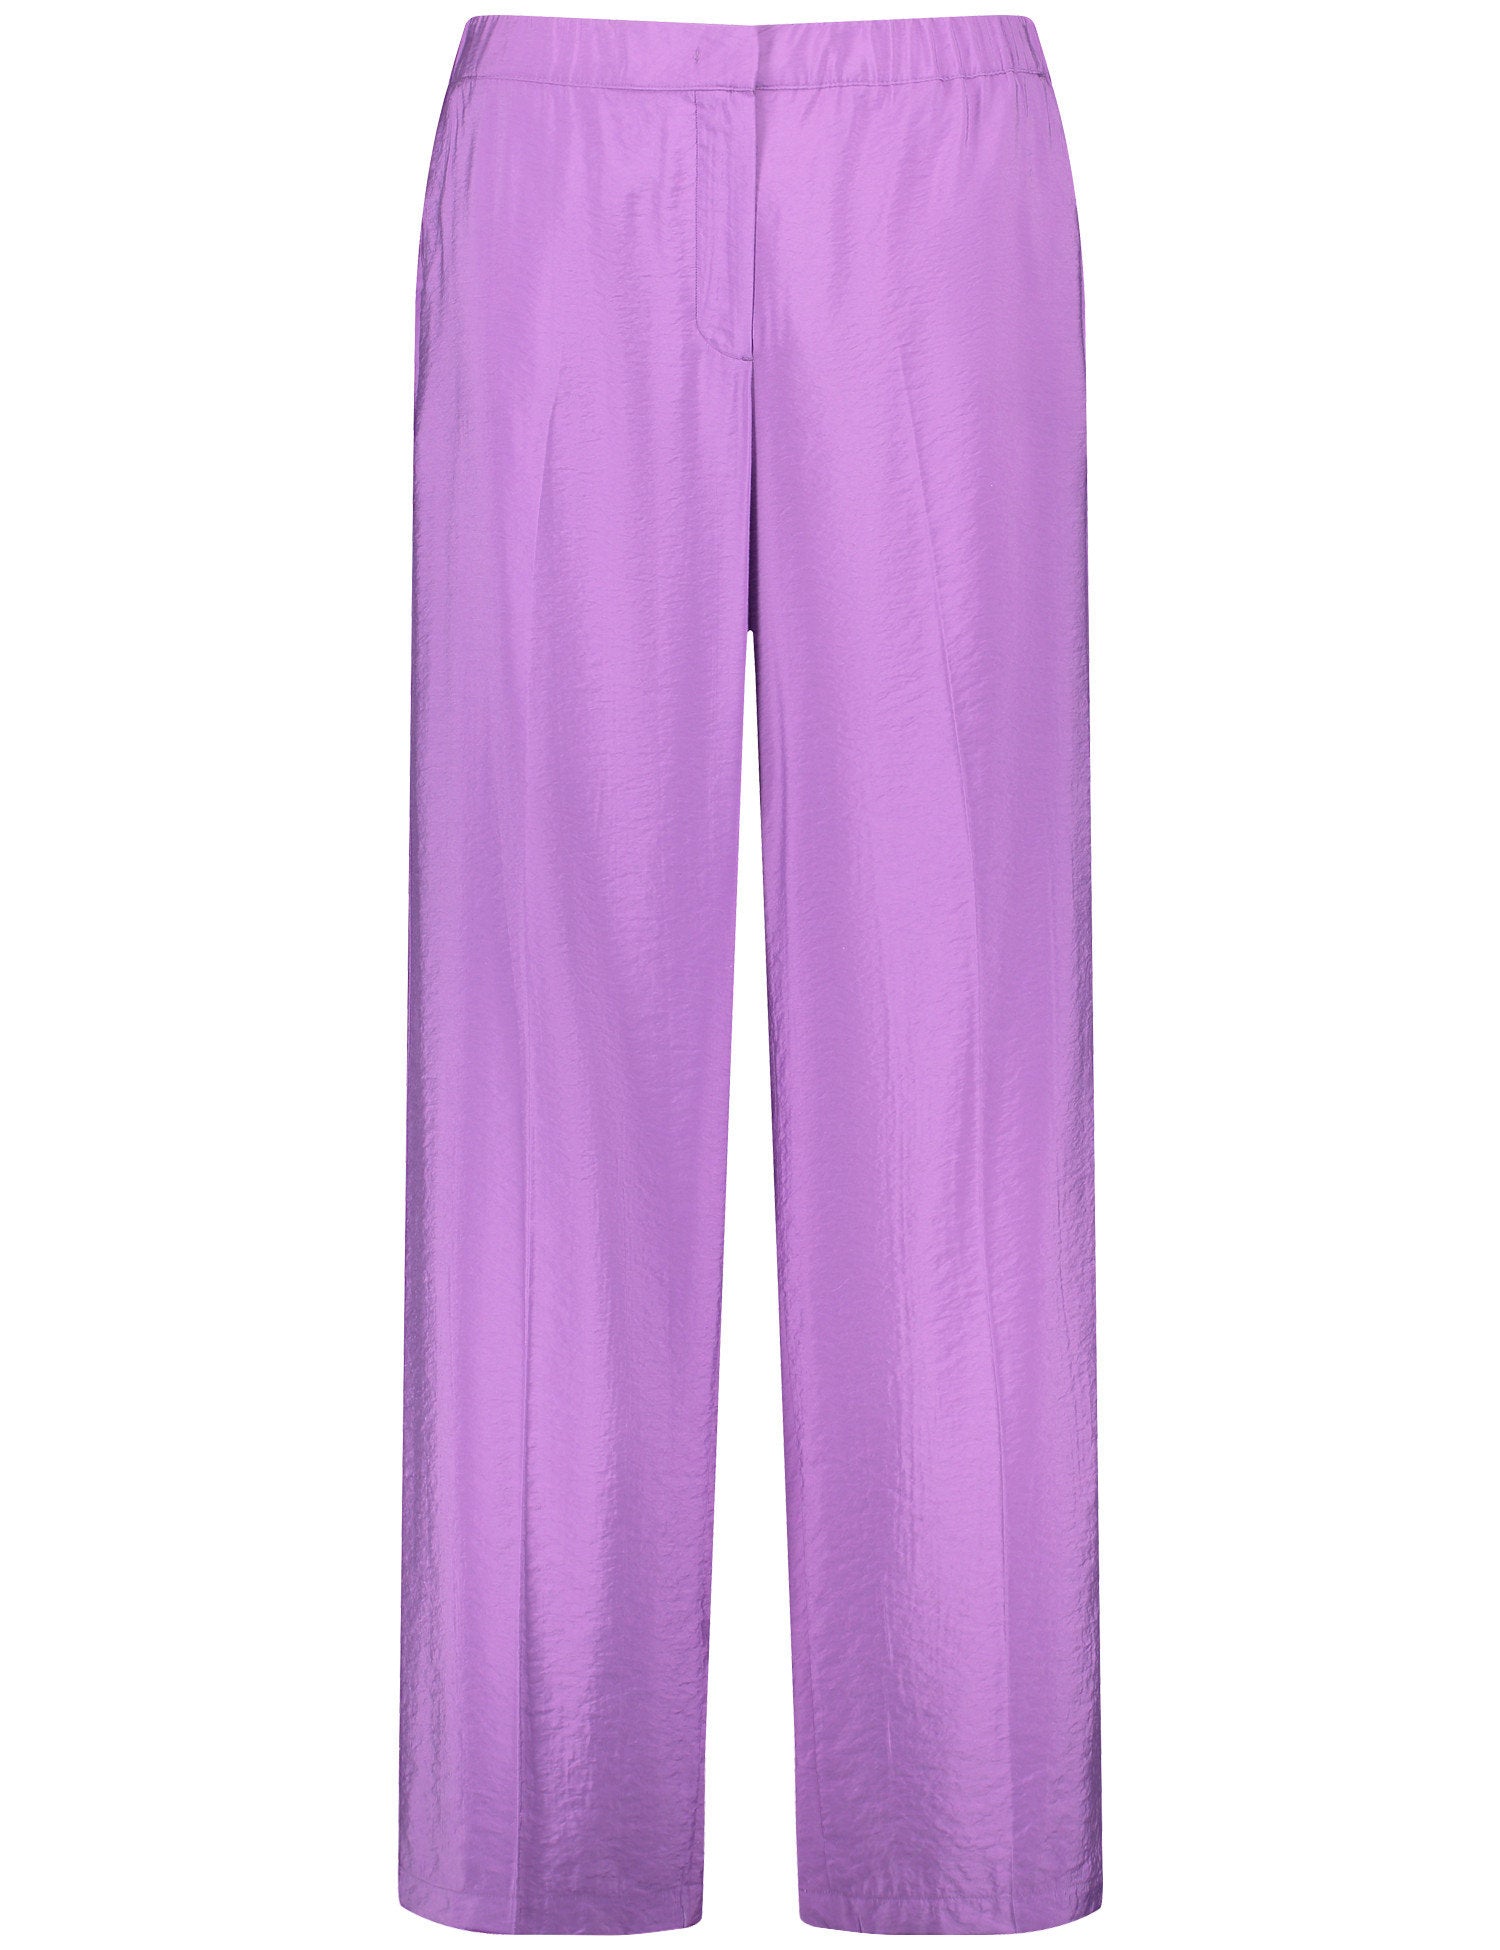 Wide Trousers With A Subtle Shimmer_420031-21052_3470_07